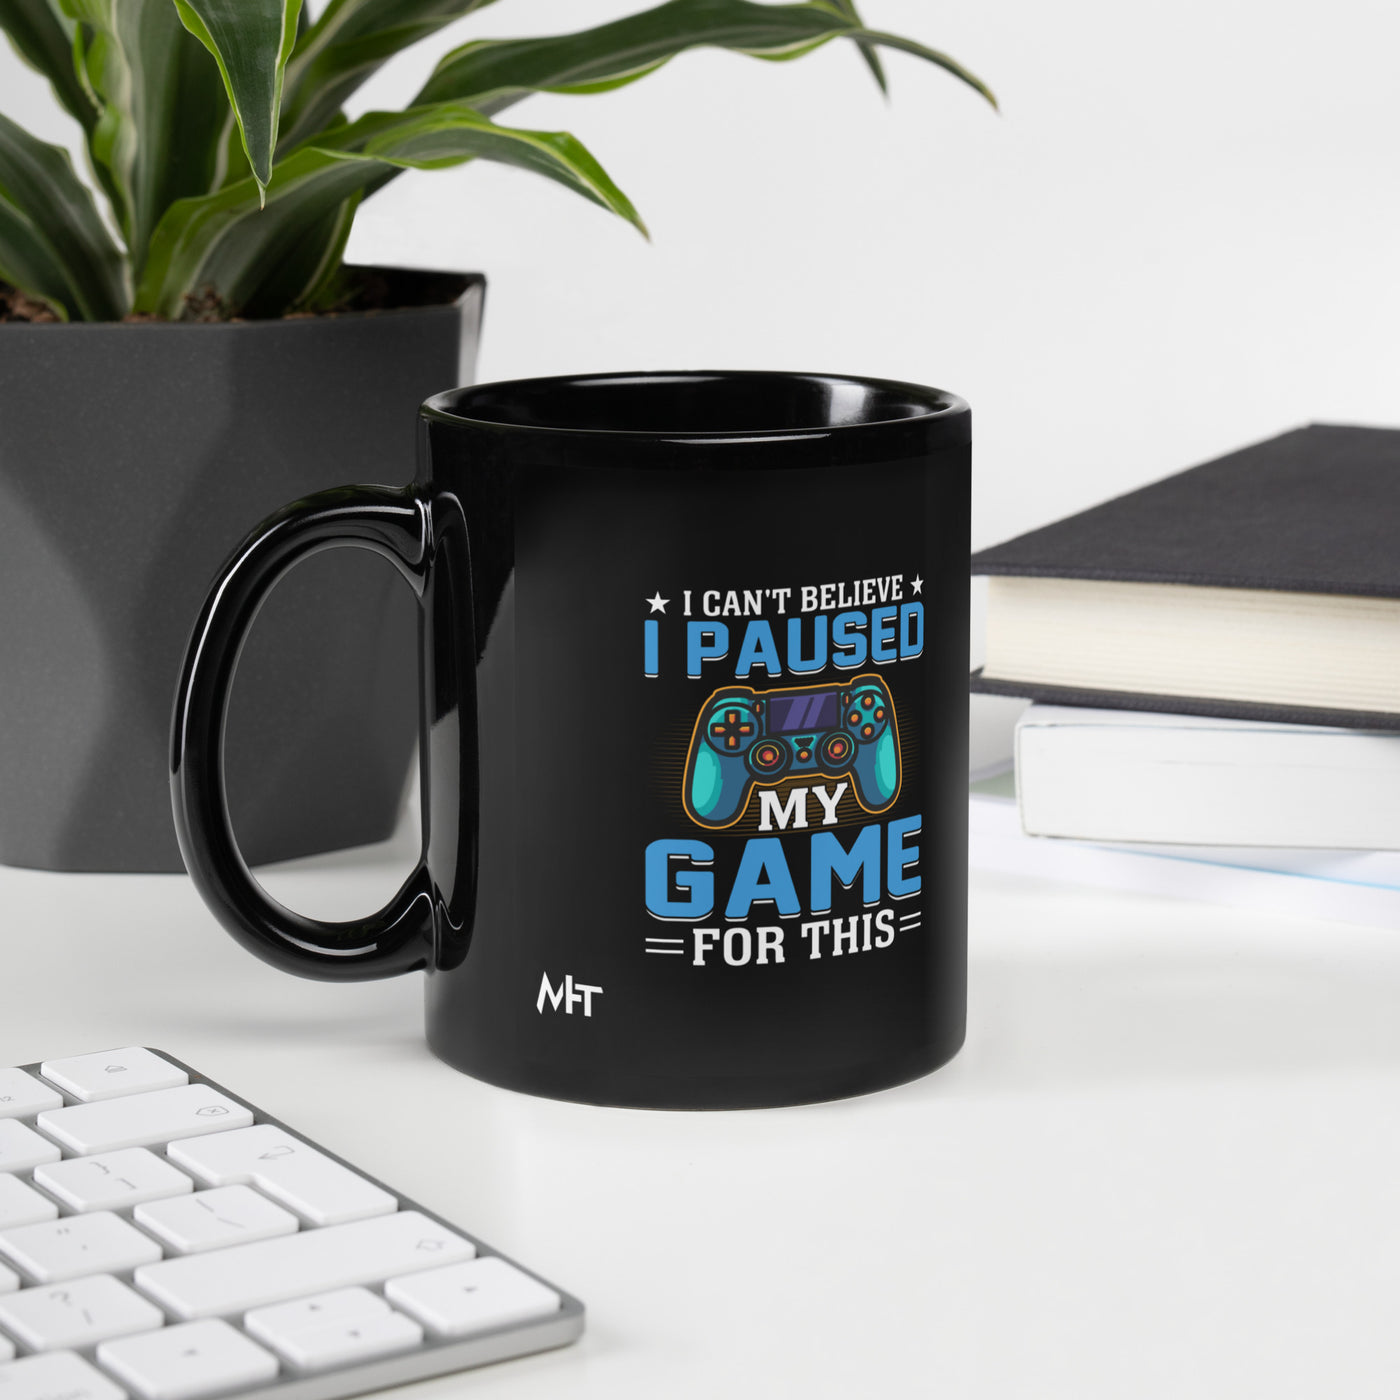 I can't Believe I Paused my Game for this - Black Glossy Mug